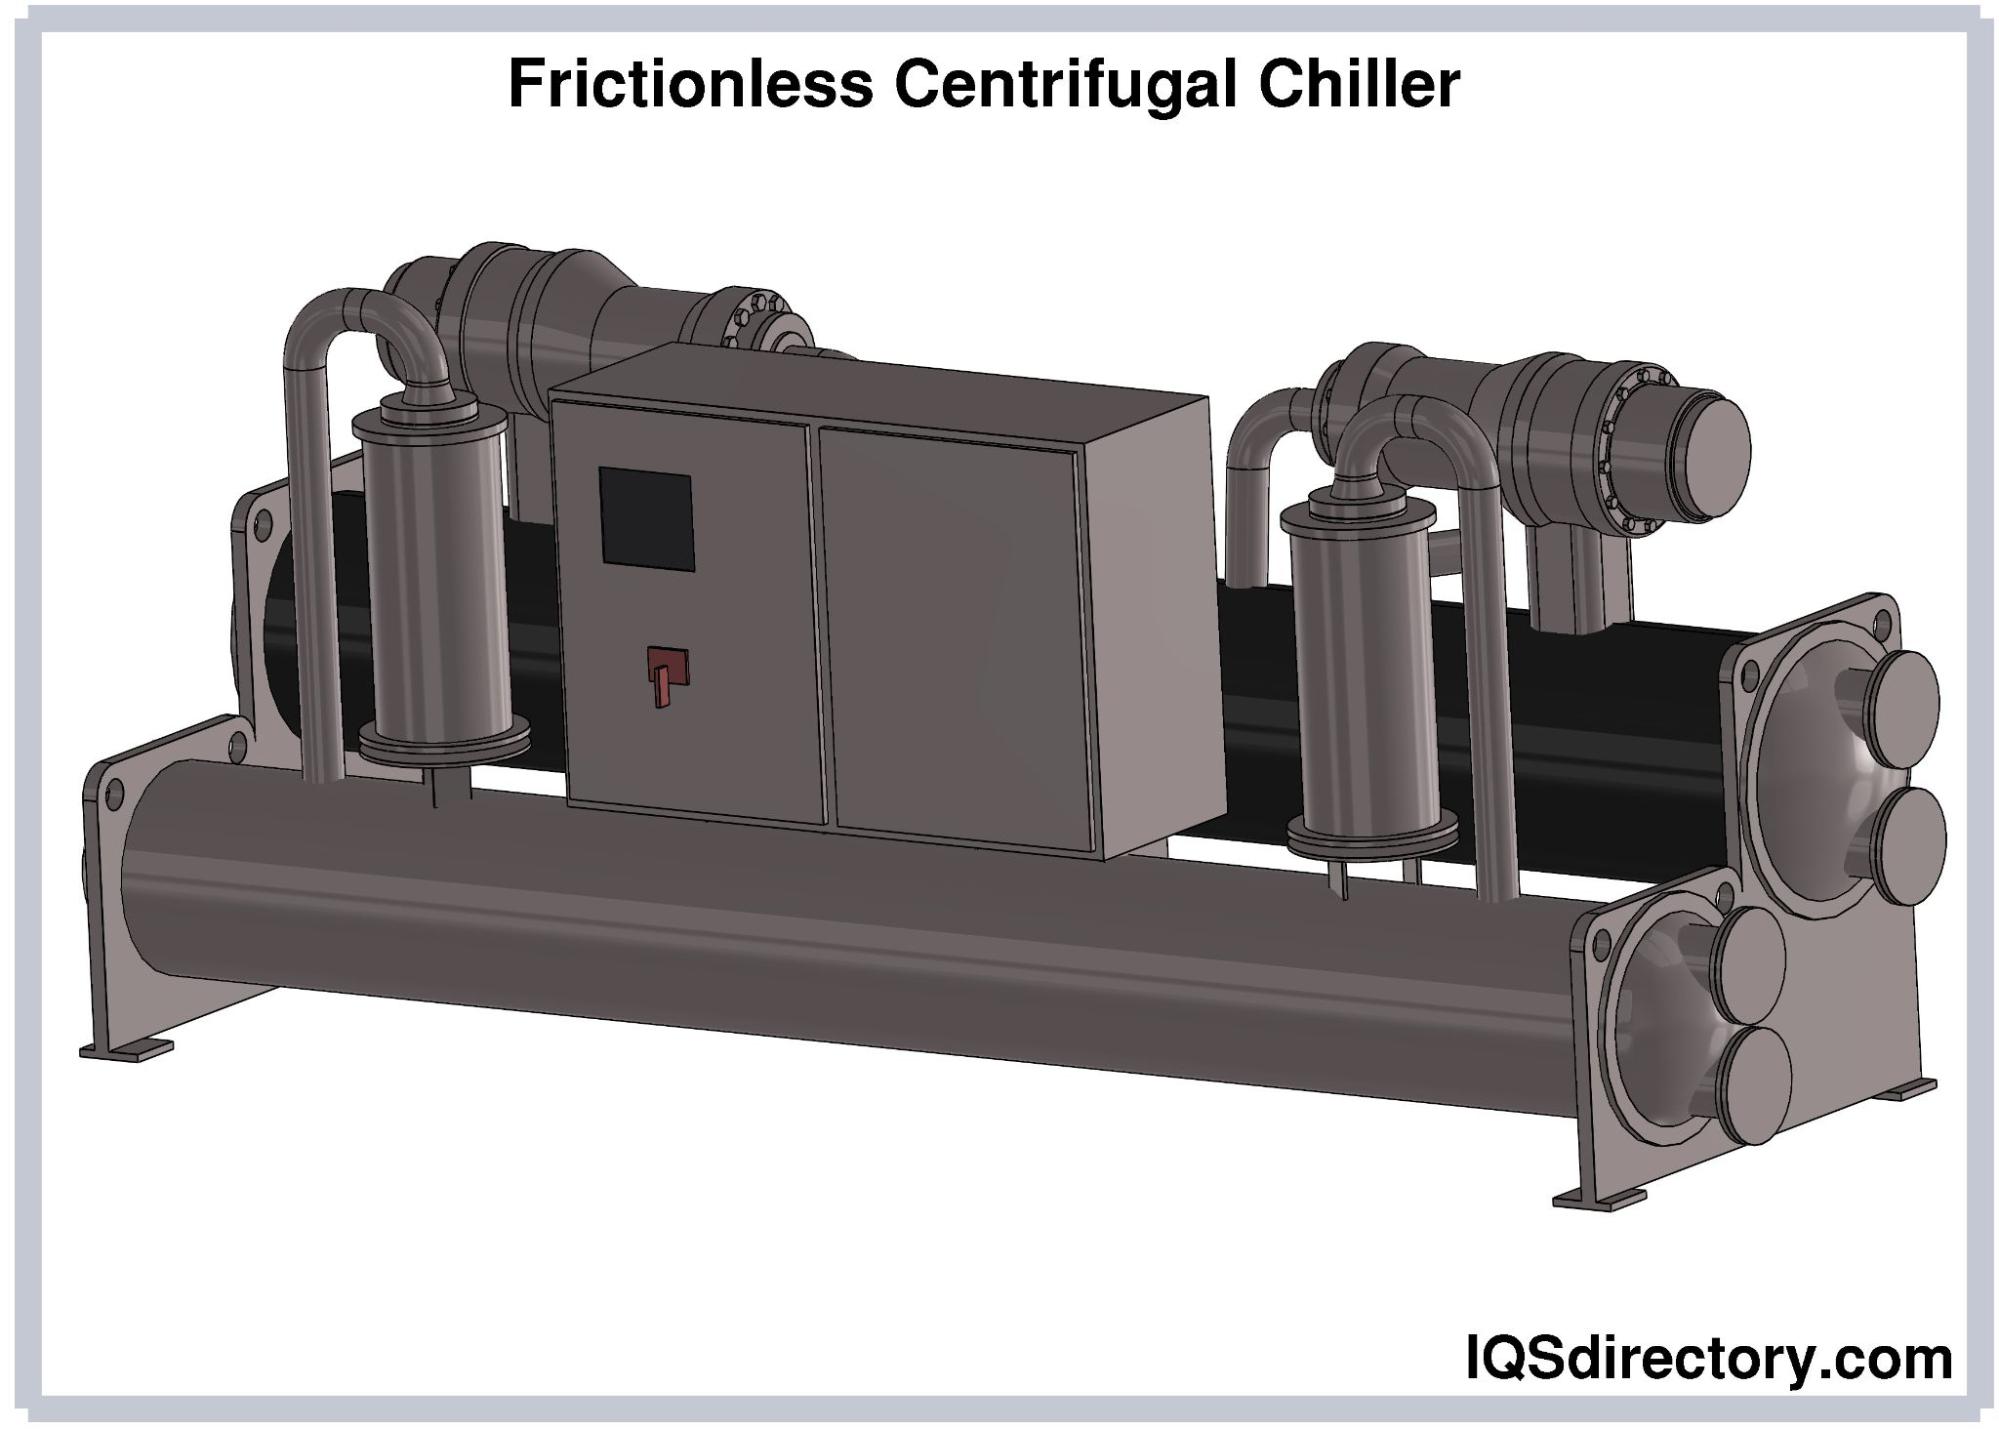 Frictionless Centrifugal Chiller